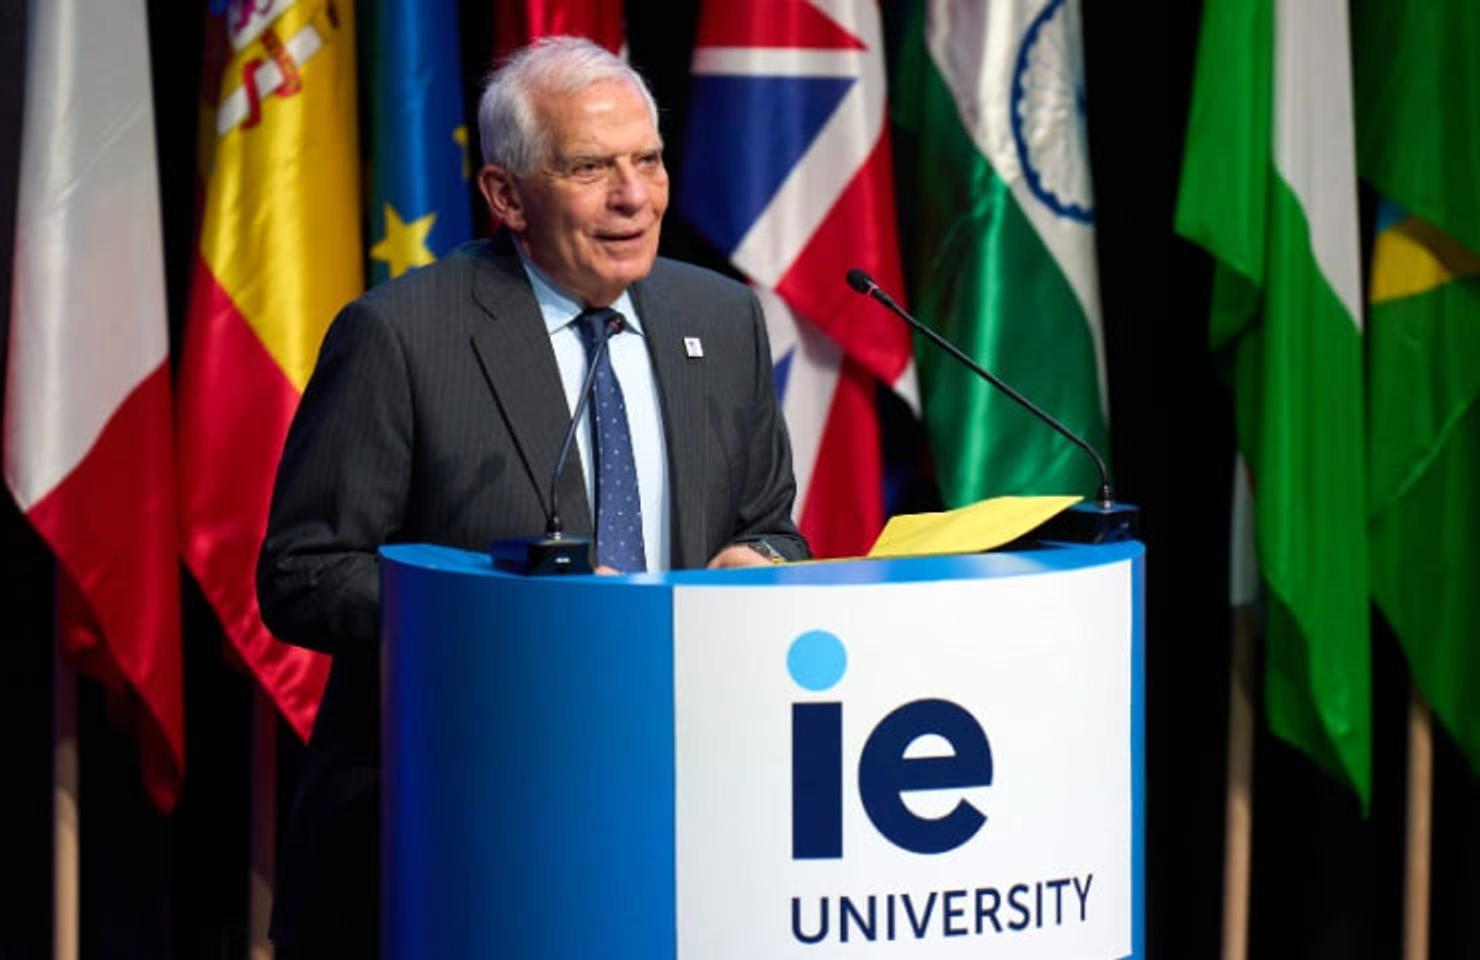 Josep Borrell calls for young generation to shape a better future at IE School of Politics, Economics and Global Affairs